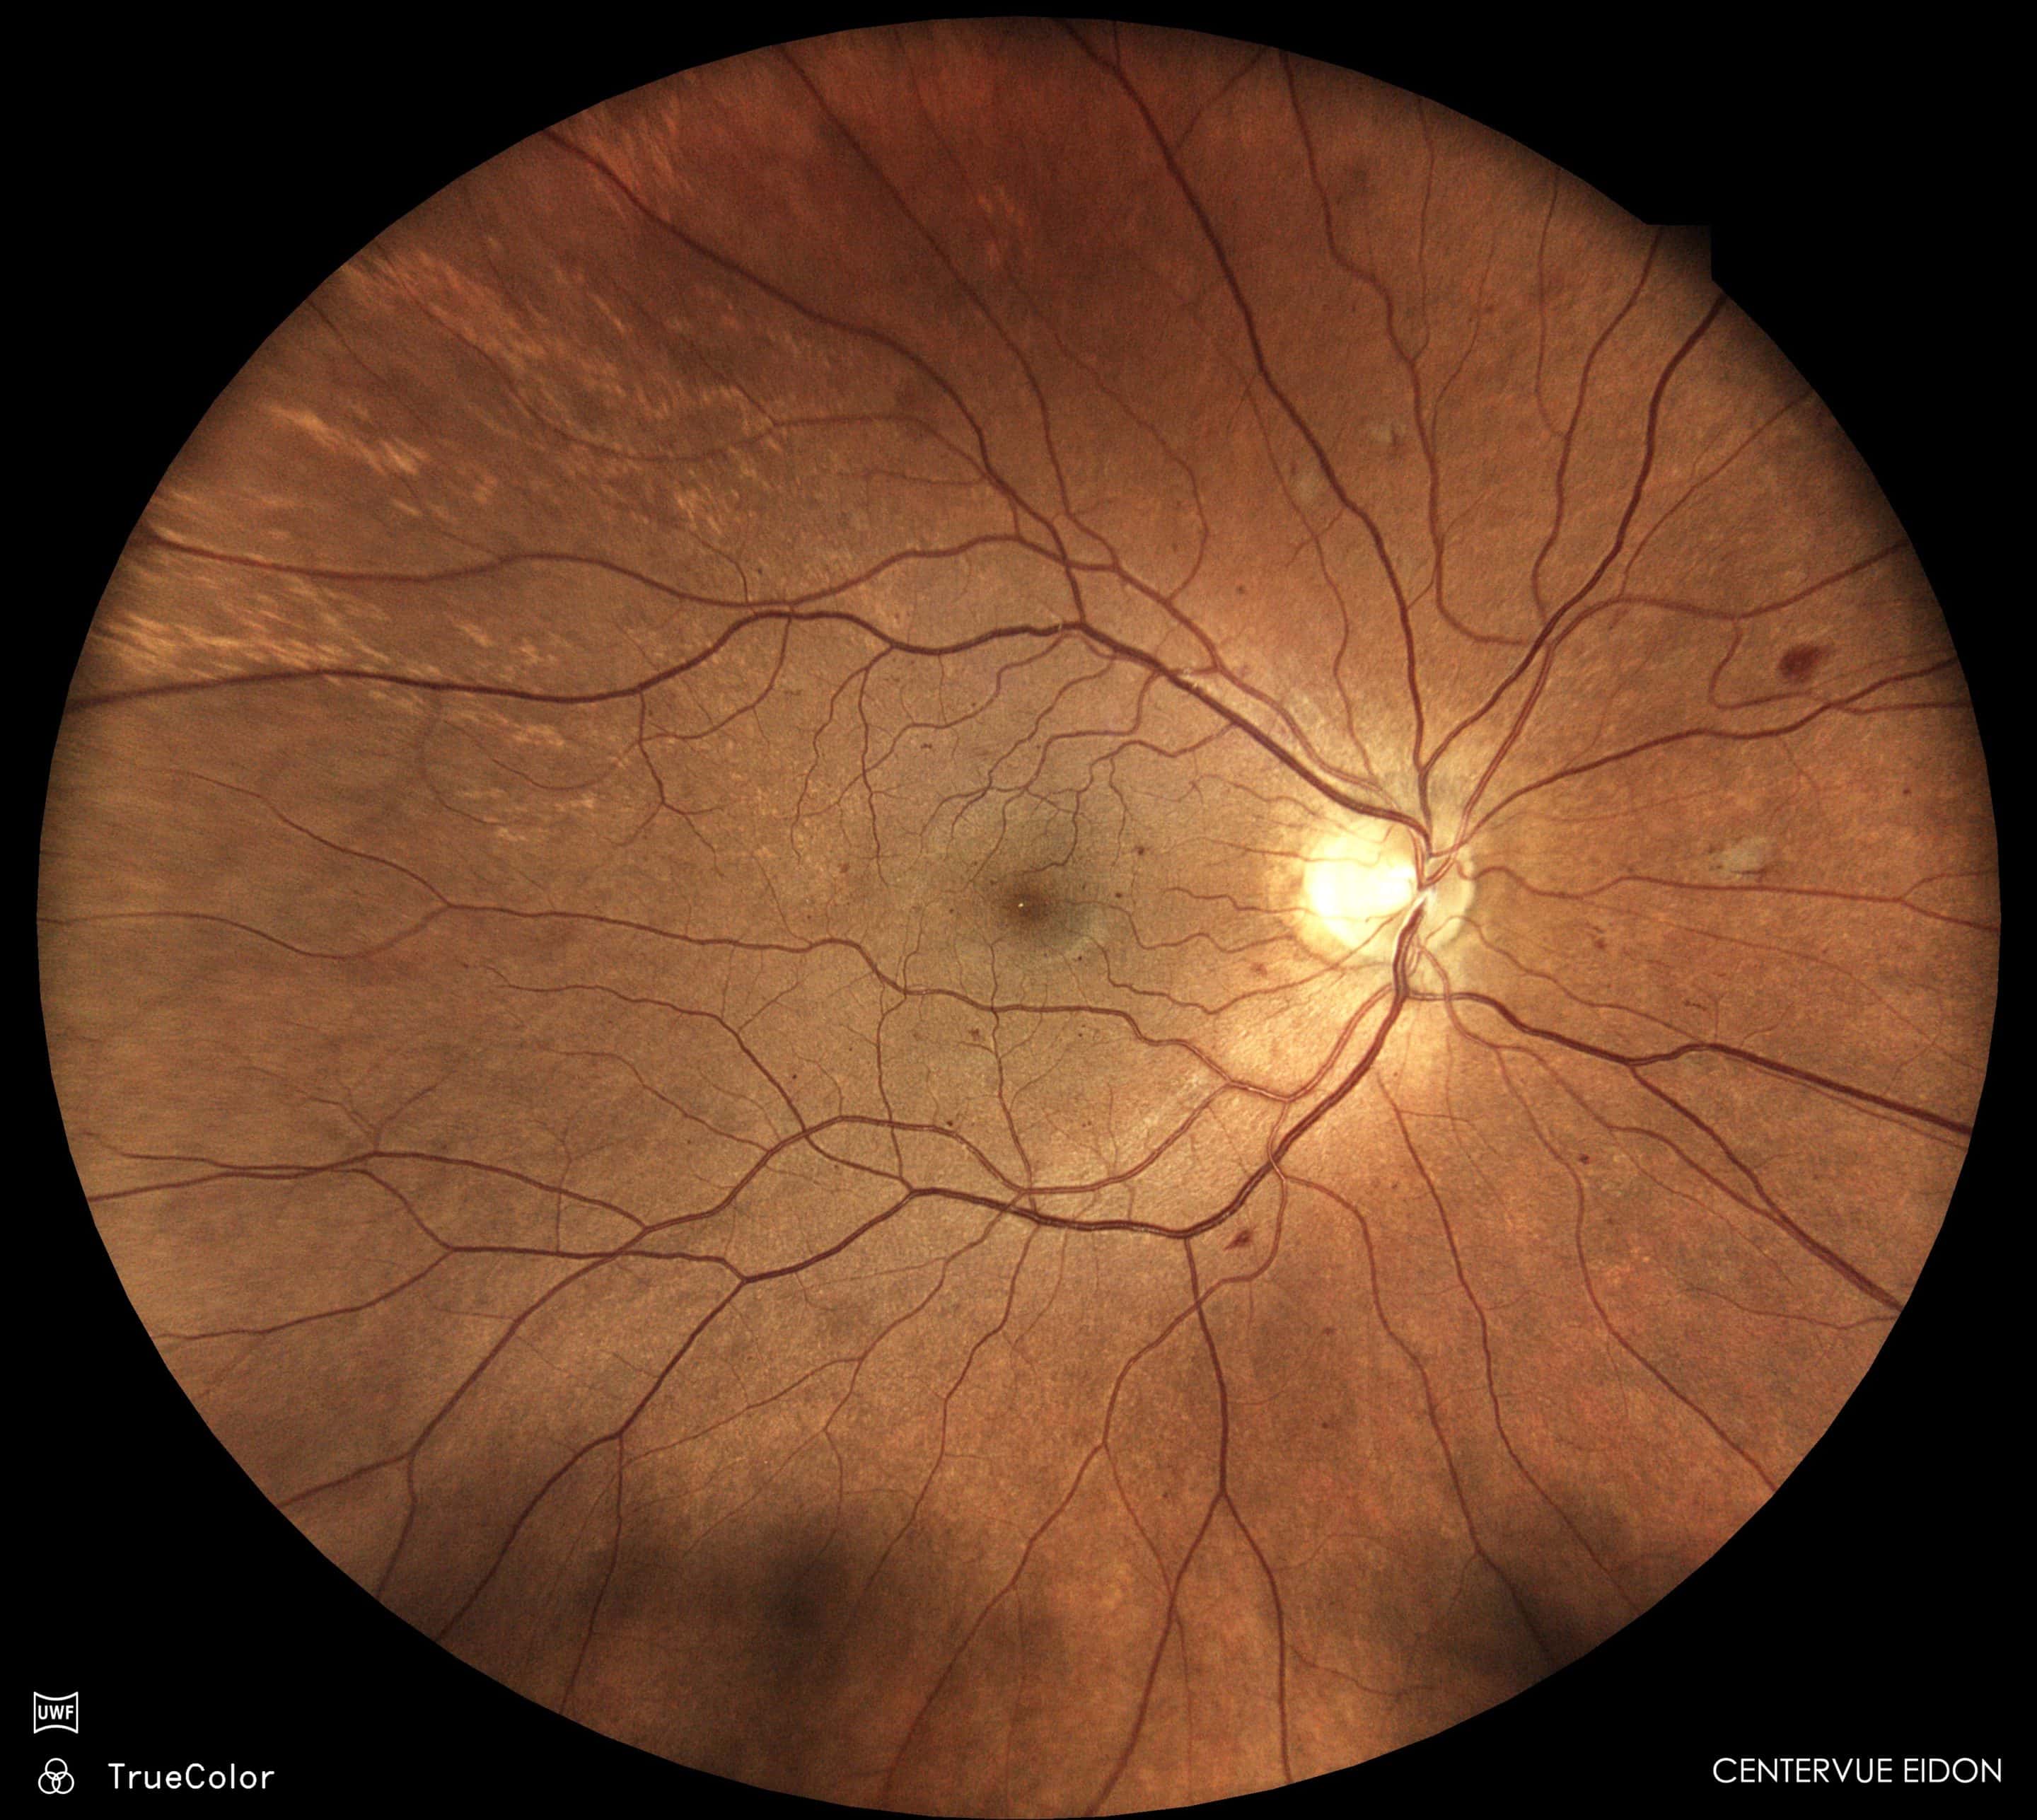 Diabetic retinopathy including haemorrhages in the retina - Neilson Eyecare